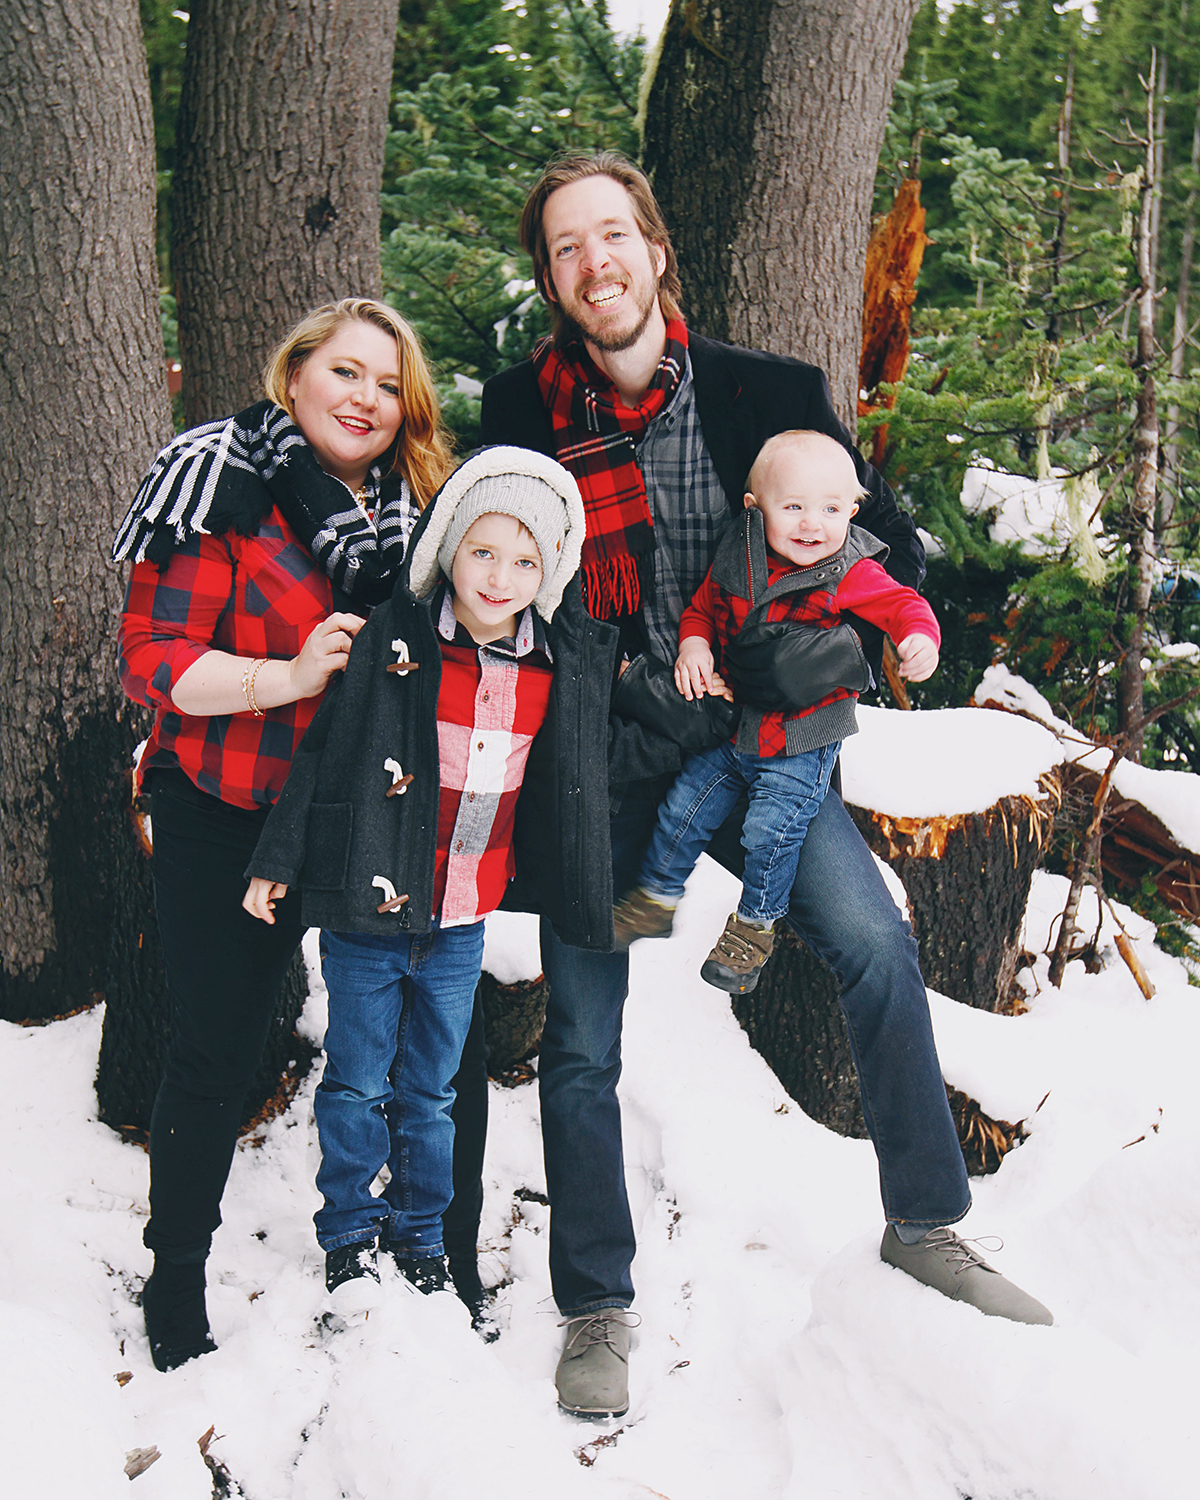 Holiday Family Photos featured on A Well Crafted Party